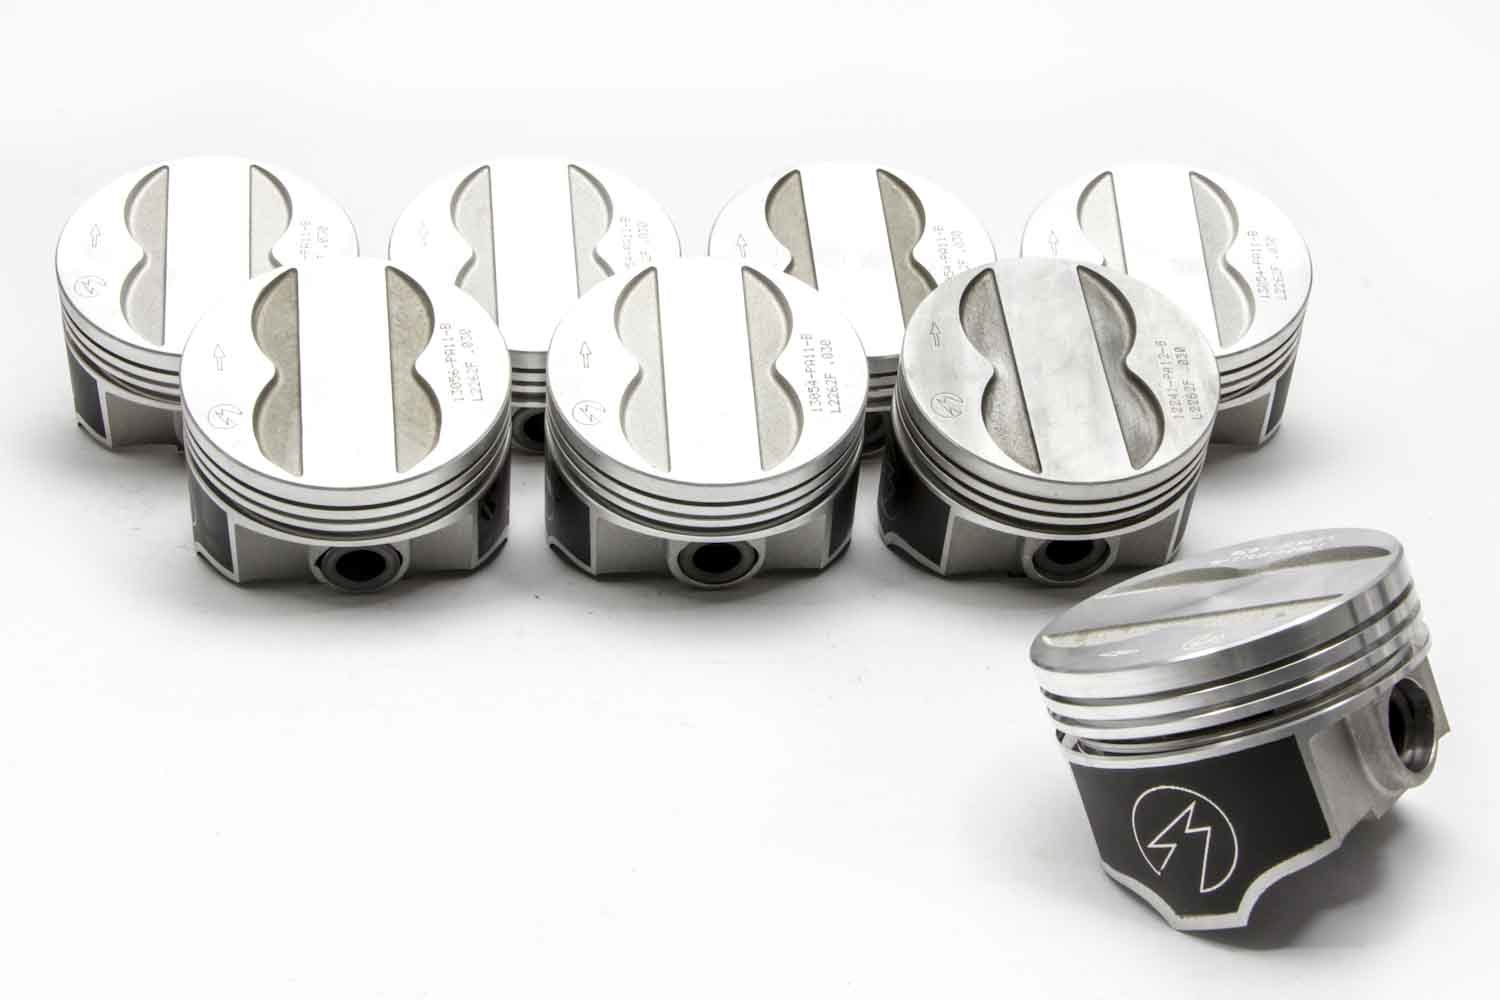 Sealed Power L2262F30 Piston, Speed Pro, Forged, 4.150 in Bore, 5/64 x 5/64 x 3/16 in Ring Grooves, Minus 6.70 cc, Coated Skirt, Pontiac V8, Set of 8